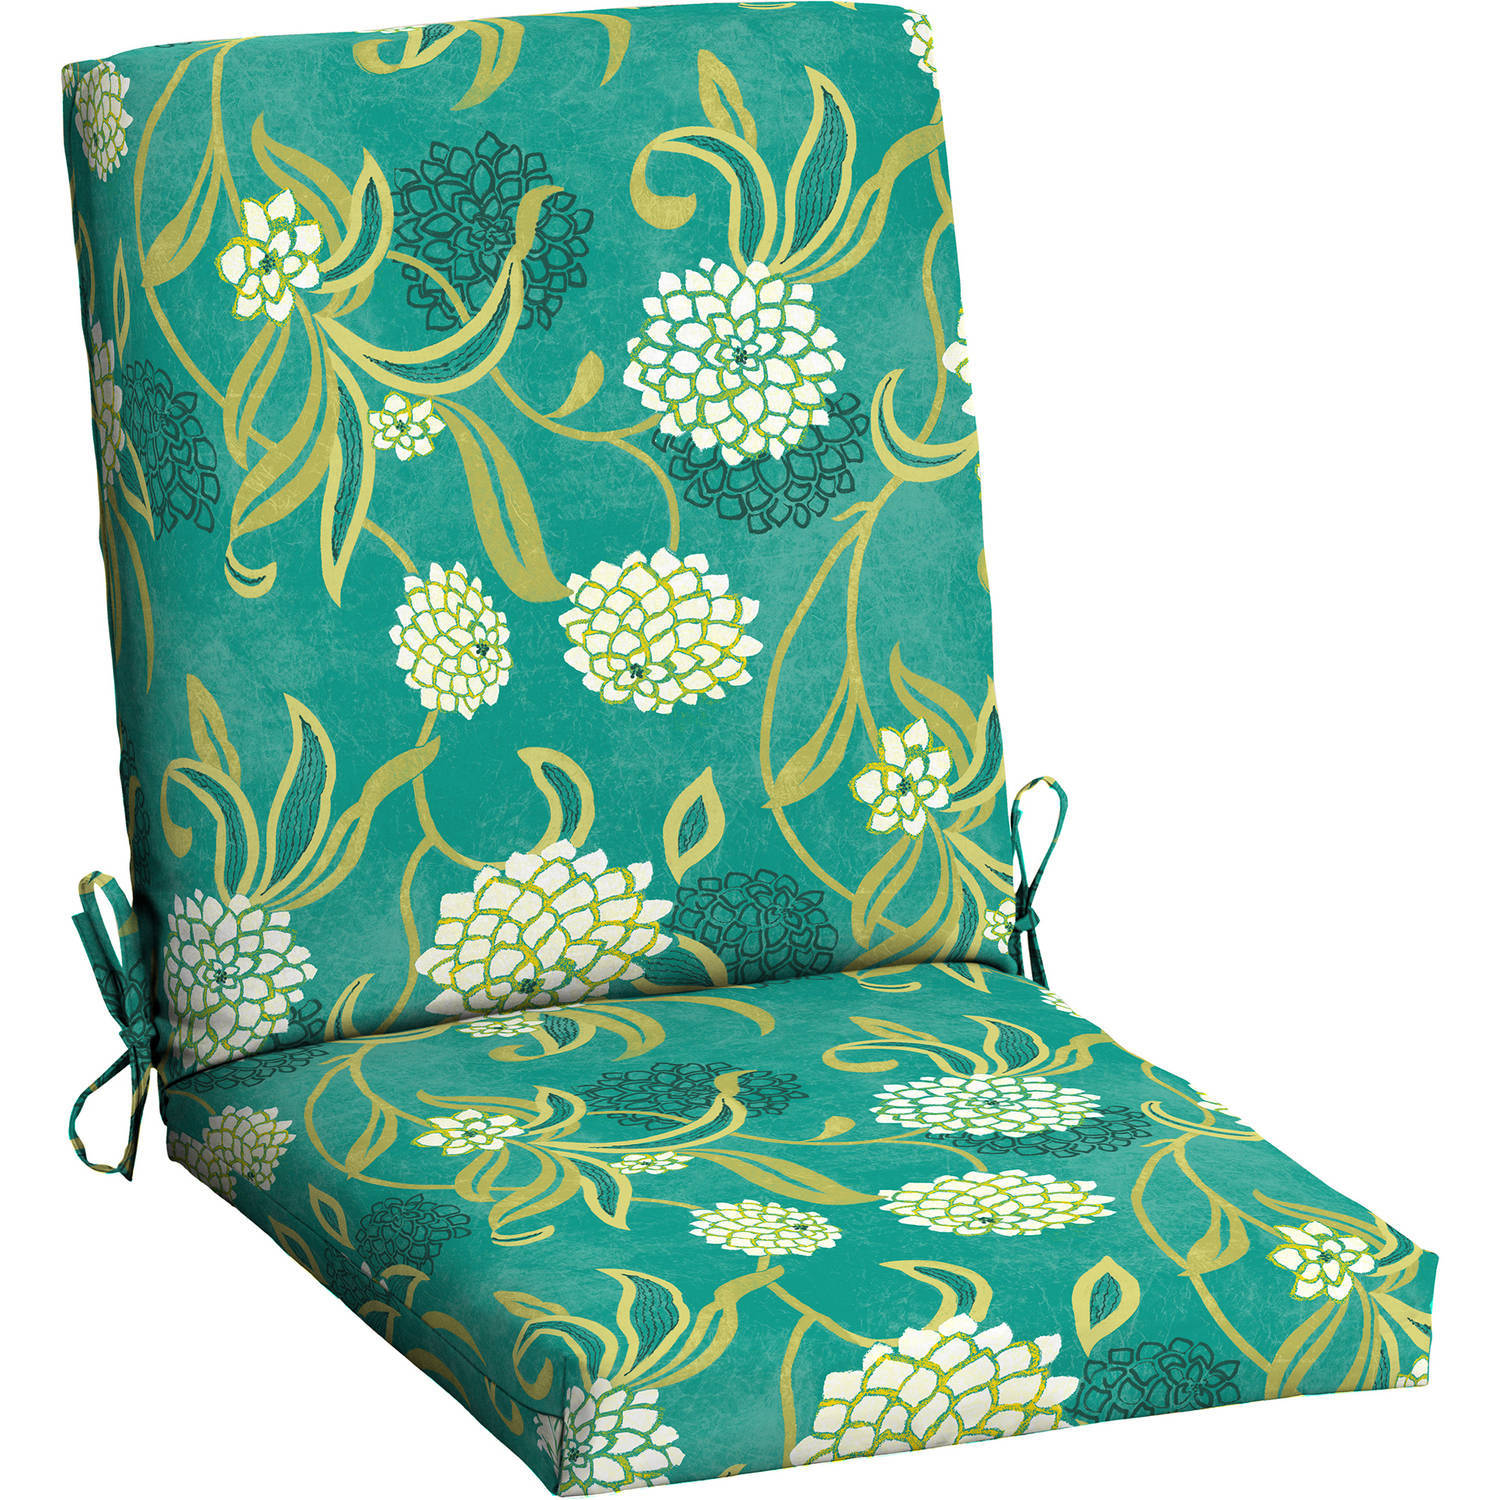 outdoor chair cushions mainstays outdoor patio dining chair cushion LPUQWYH